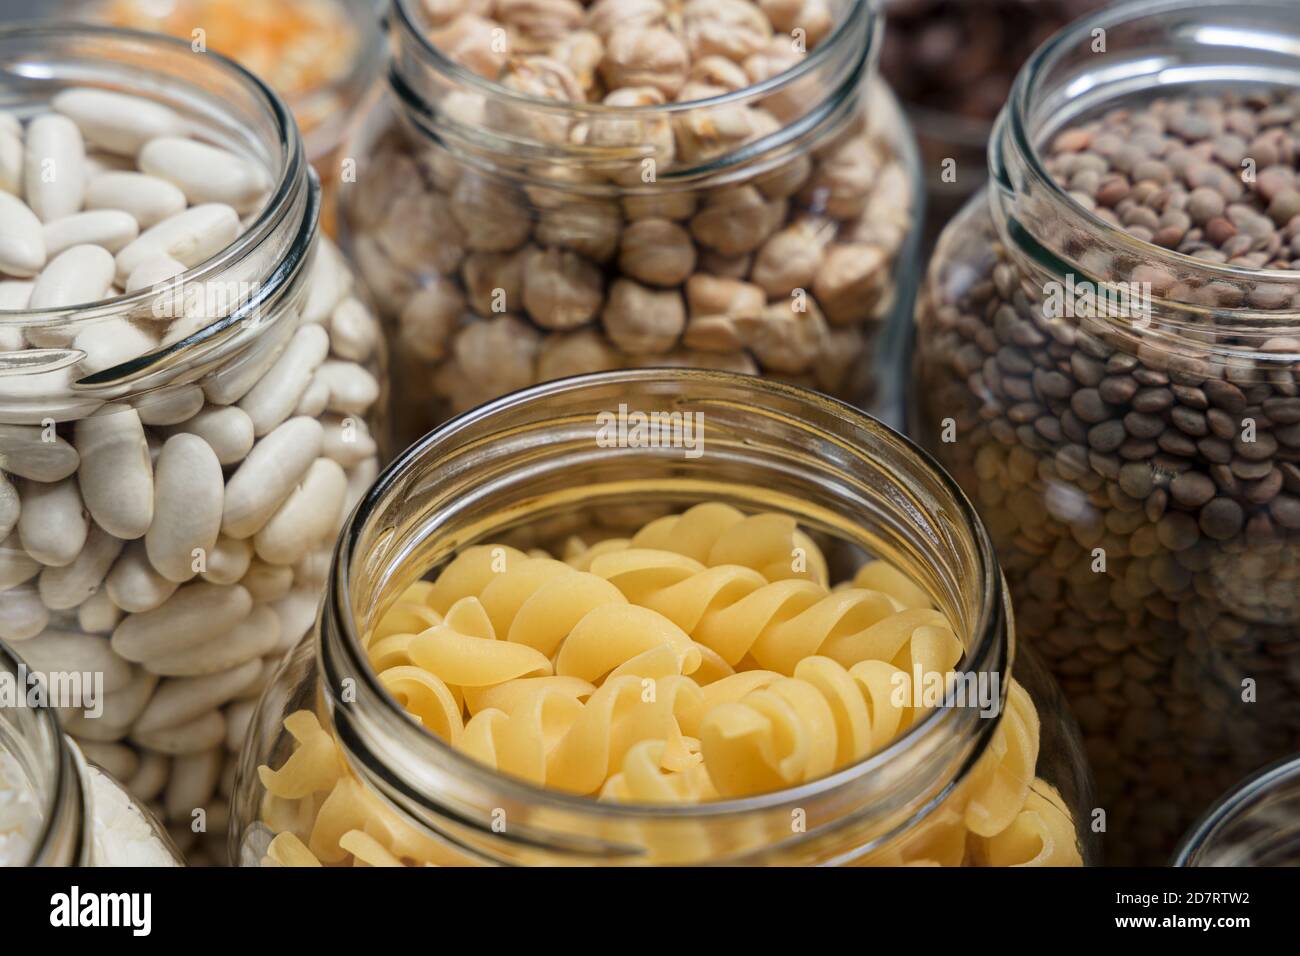 Set of glass jars with various ingredients placed on a table. Zero waste concept. Stock Photo